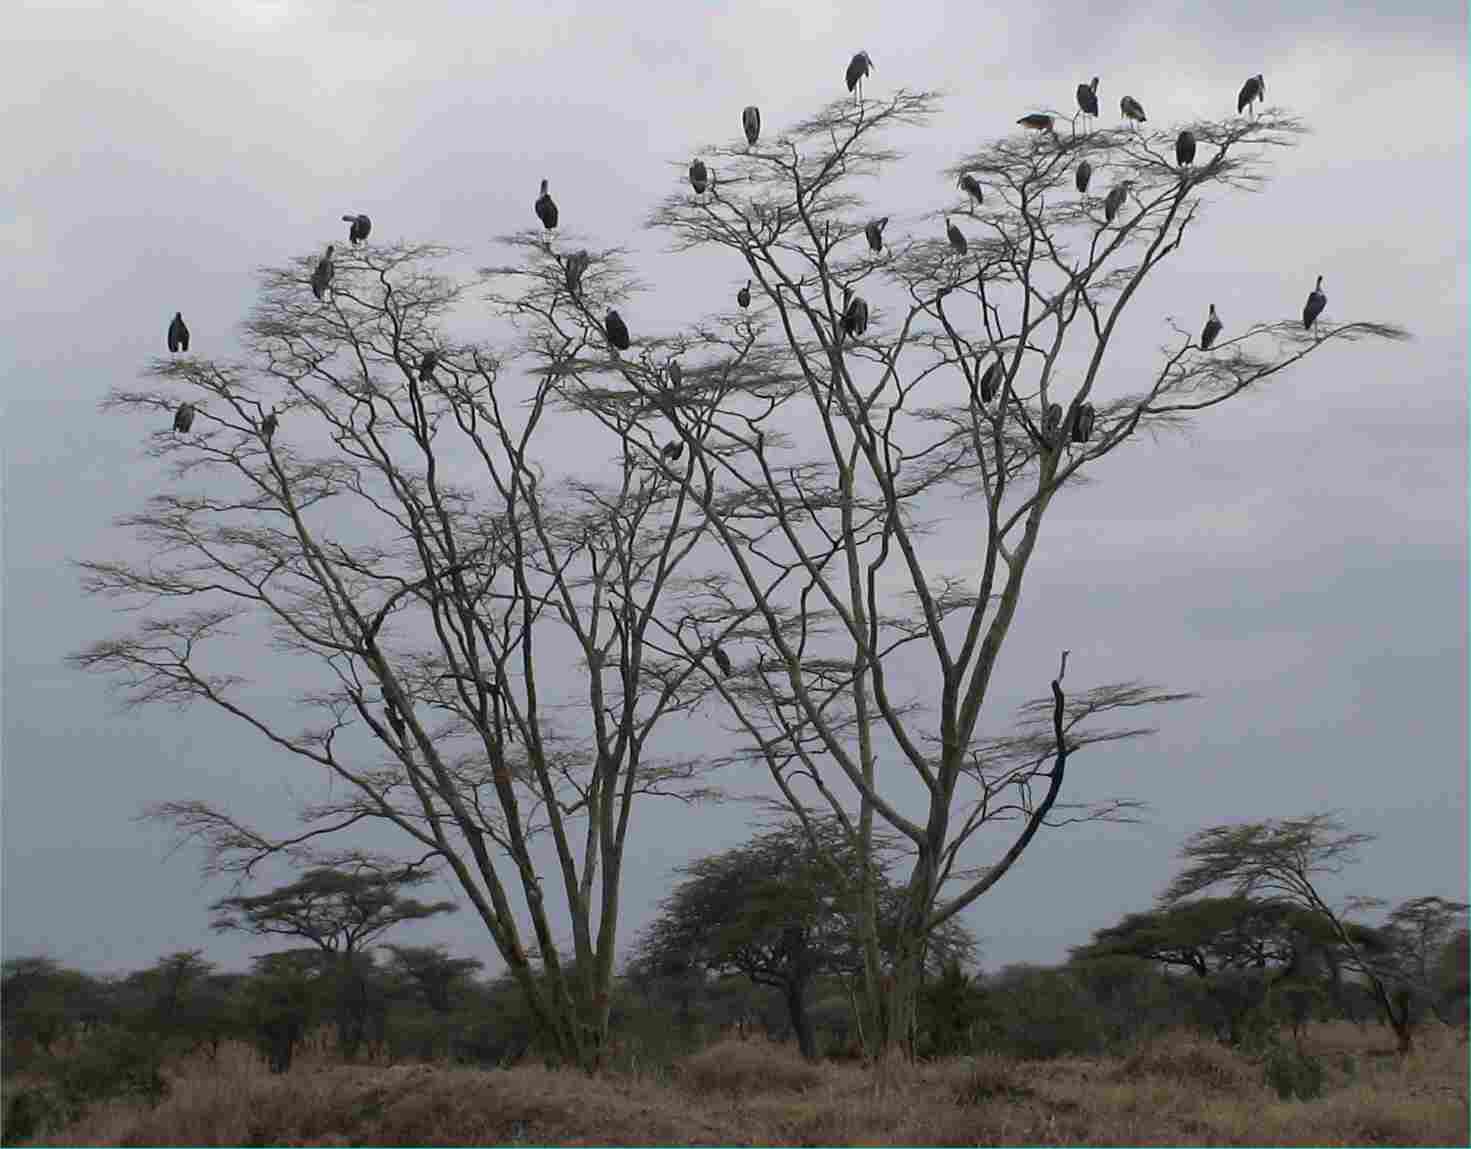 I think these are Marabou Storks sitting in the trees waiting for a turn at a nearby kill.  Photo by FG, Dec. 2005.